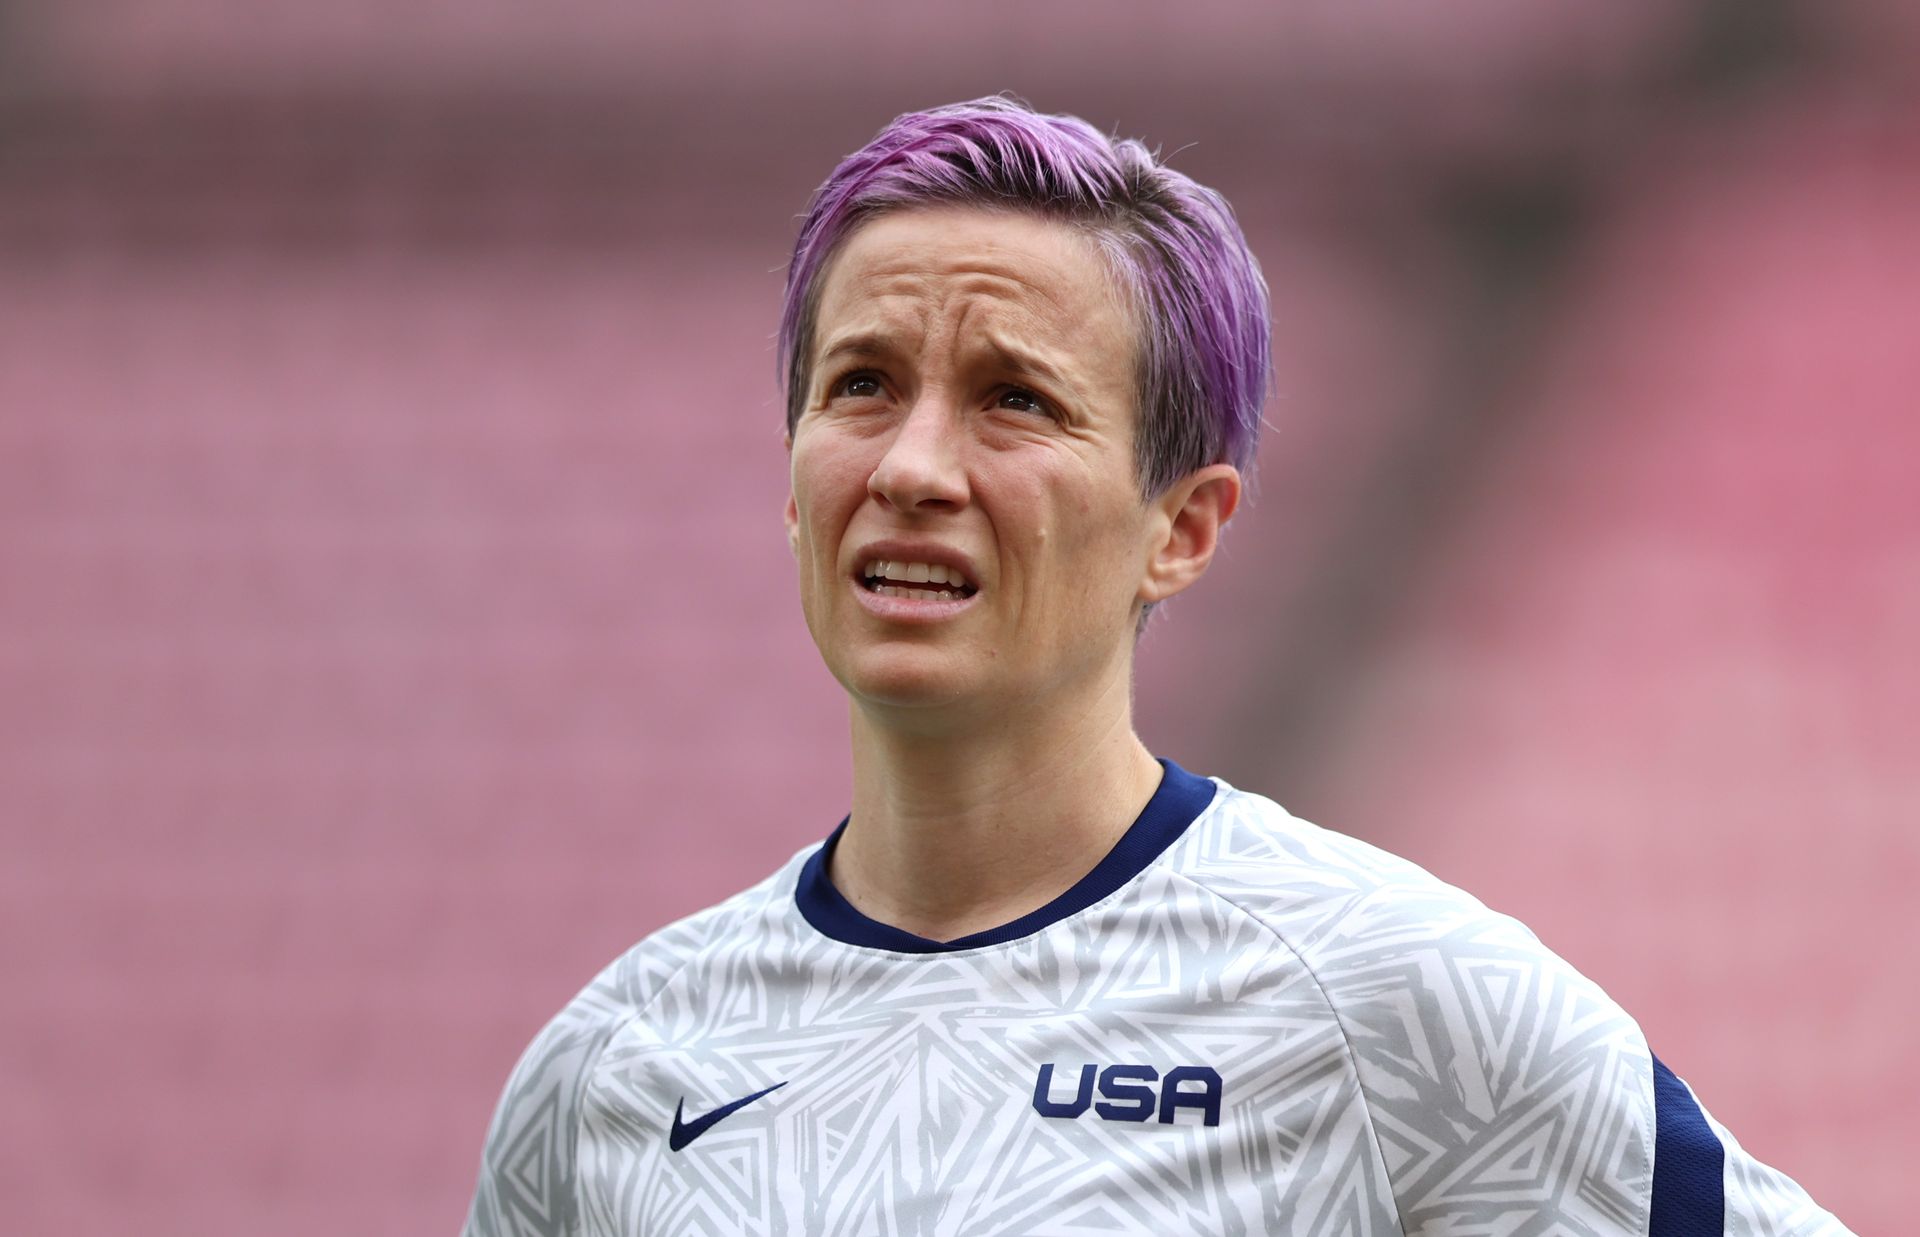 Does the US women's soccer team care more about going woke than winning?